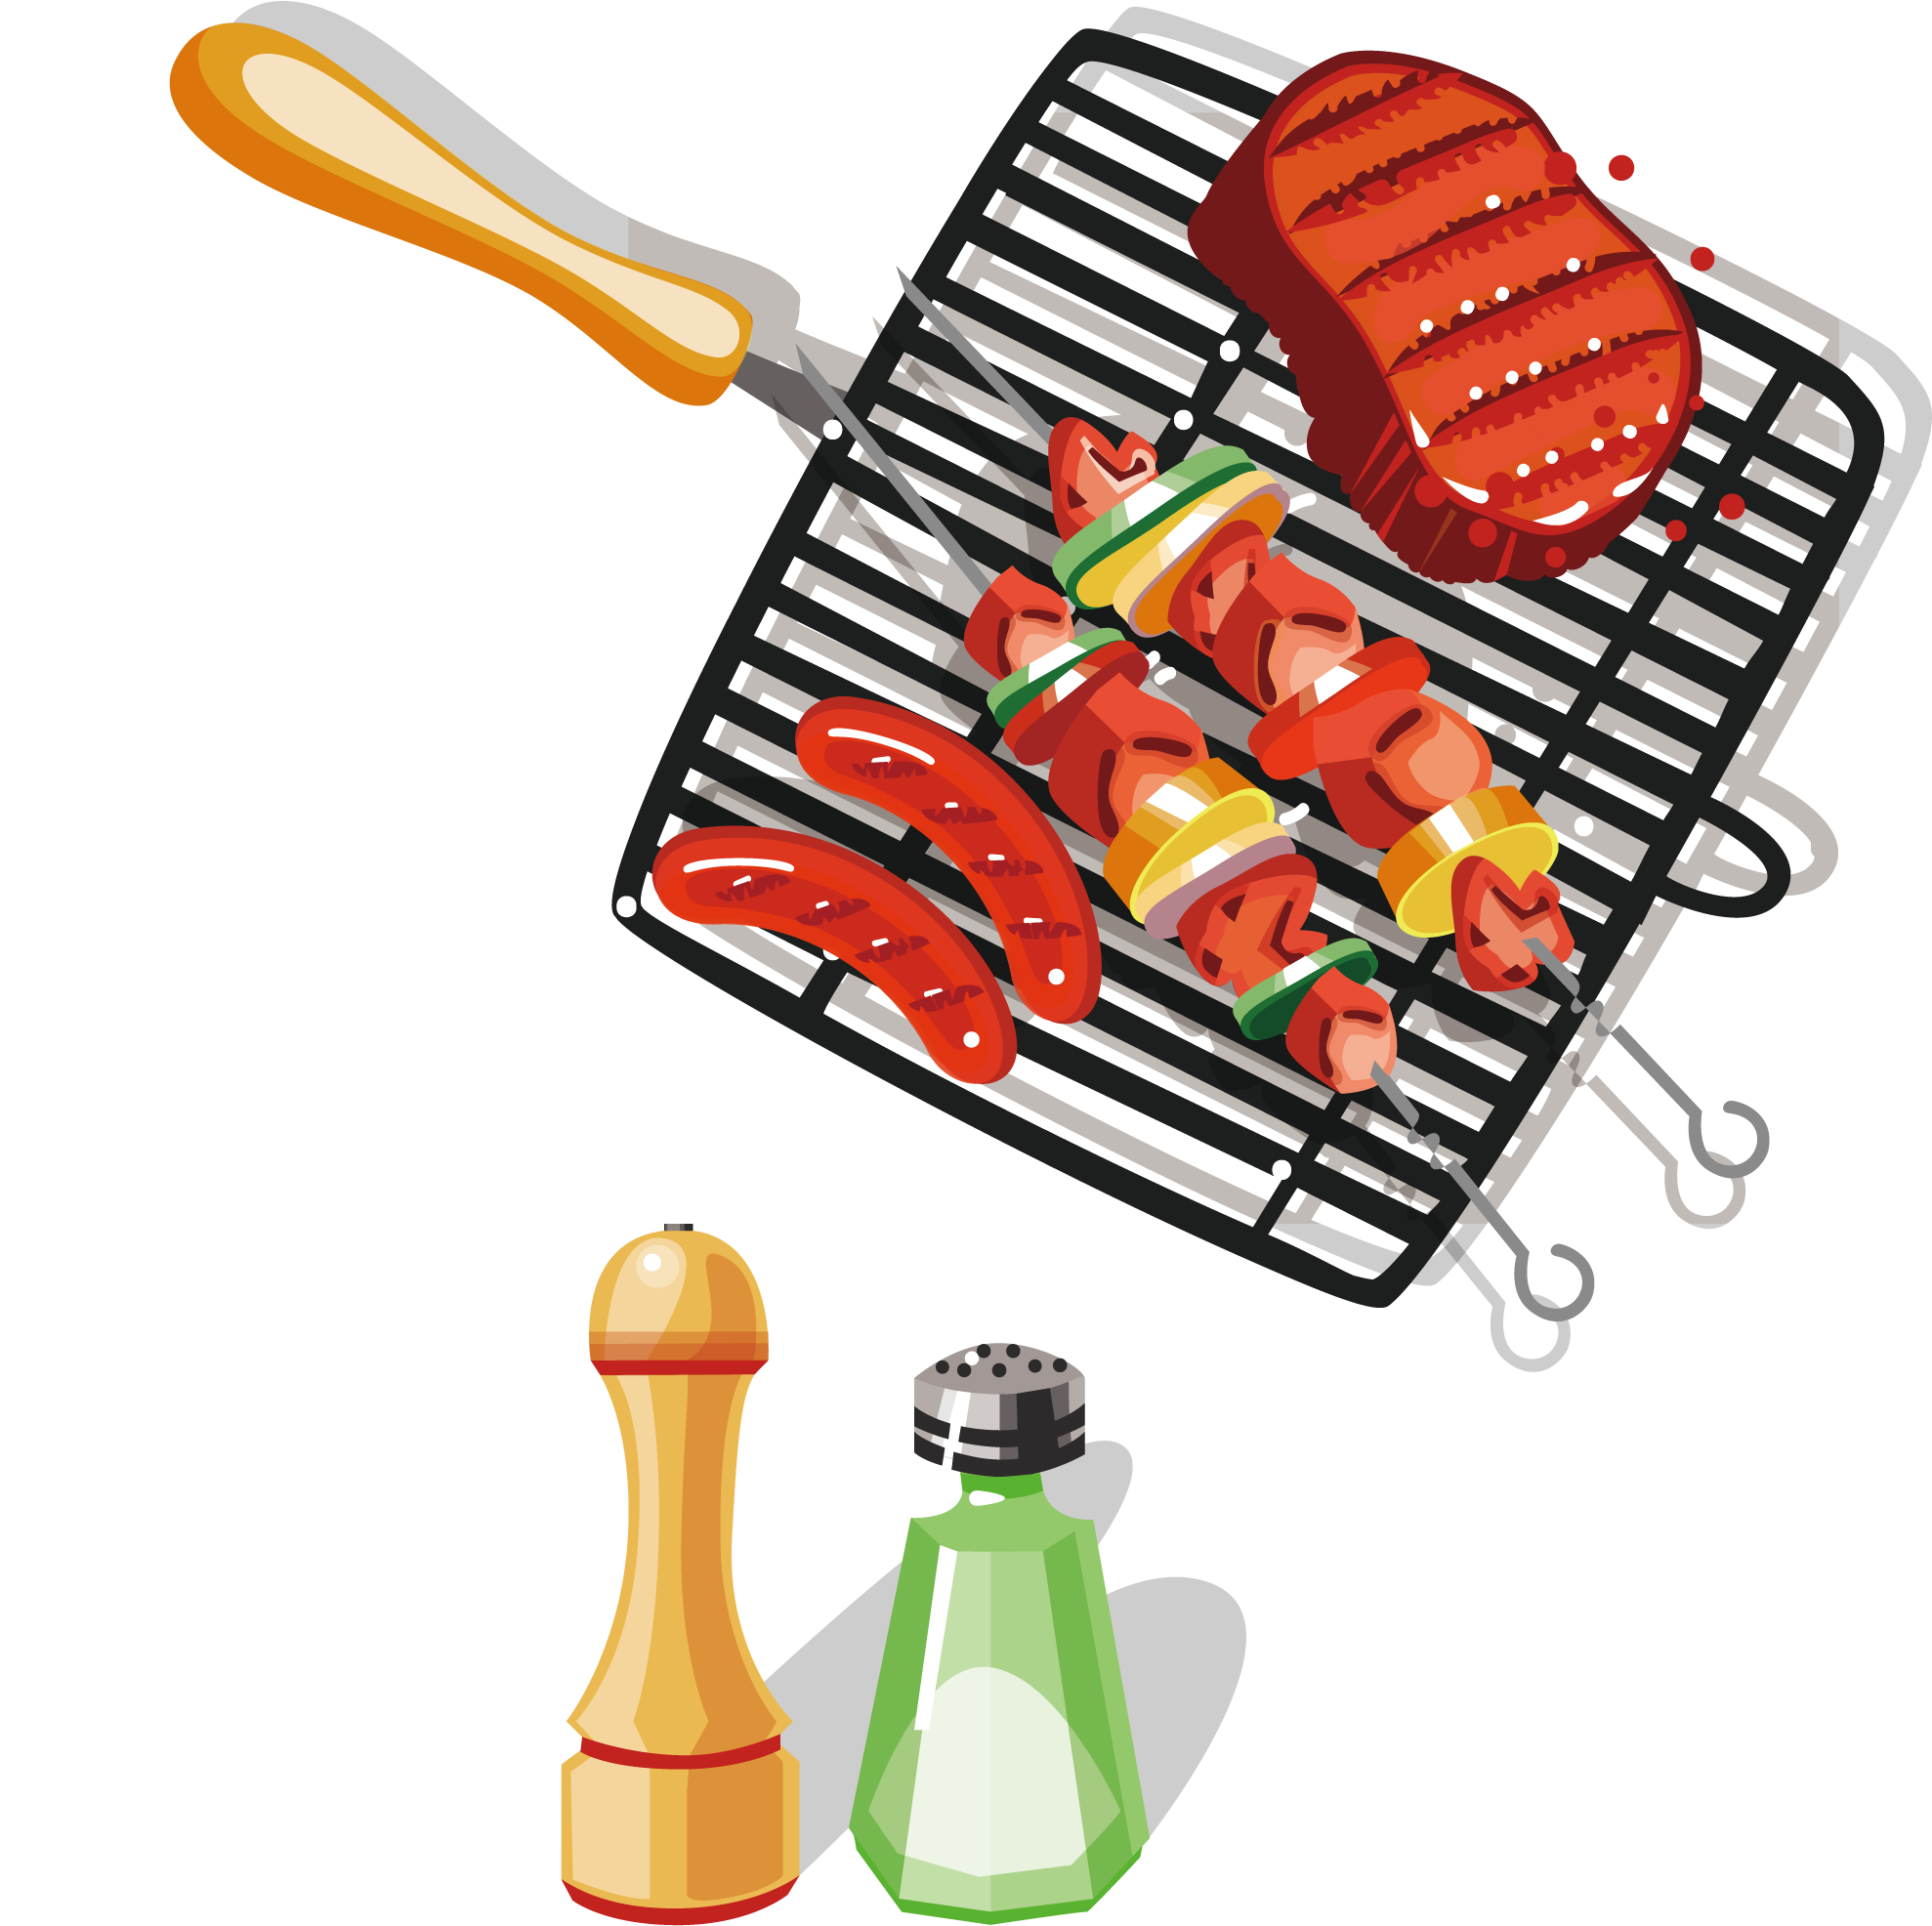 share clipart about Barbecue Bulgogi Grilling - 烤肉 架 卡通, Find more high qua...